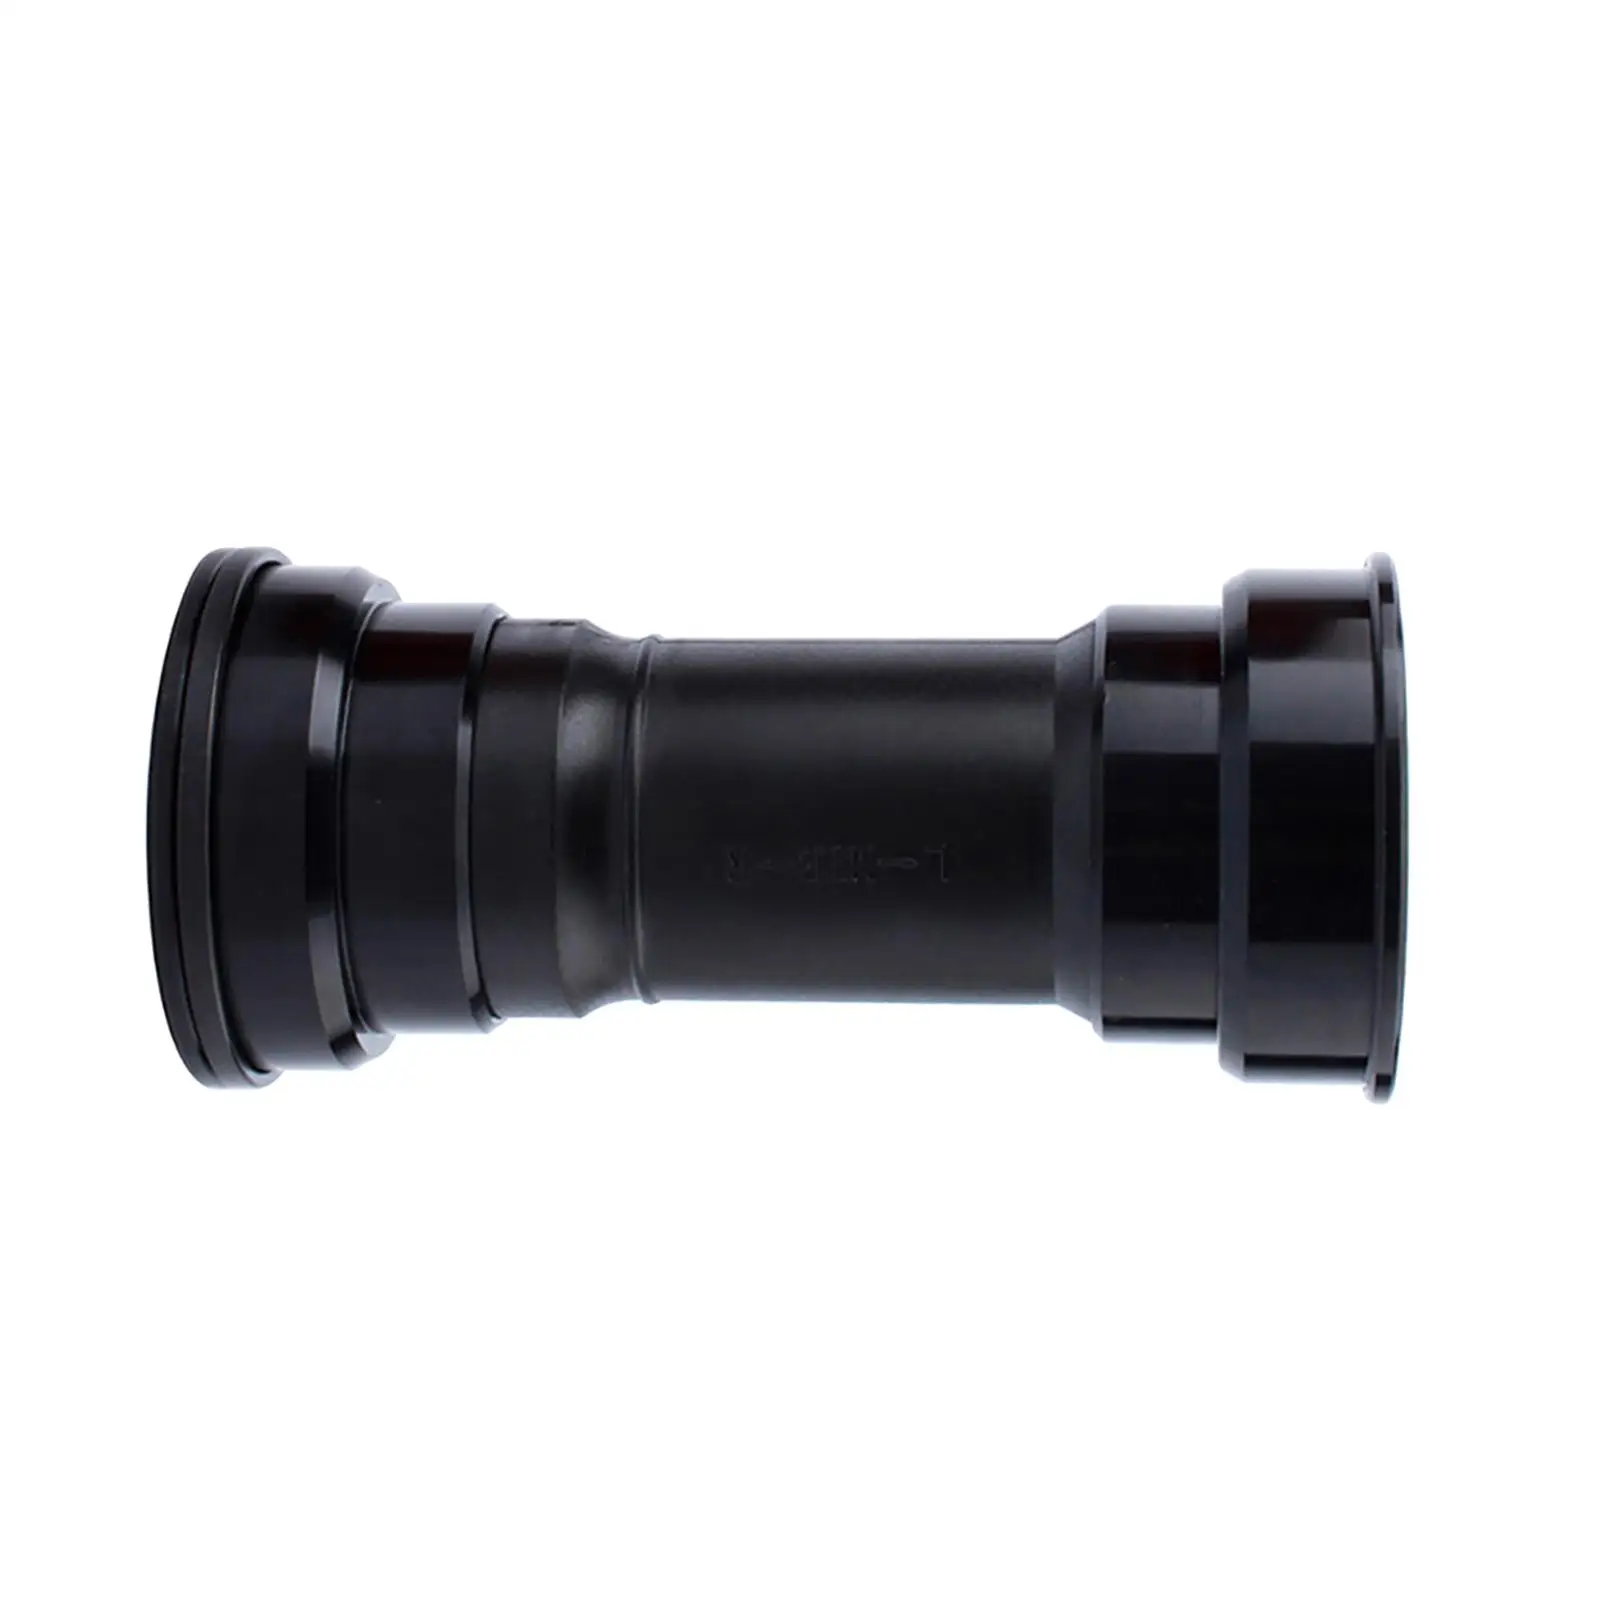 Bottom Bracket BB90-92mm Aluminum Alloy 24mm Crank 41mm Cup for Road Bicycle